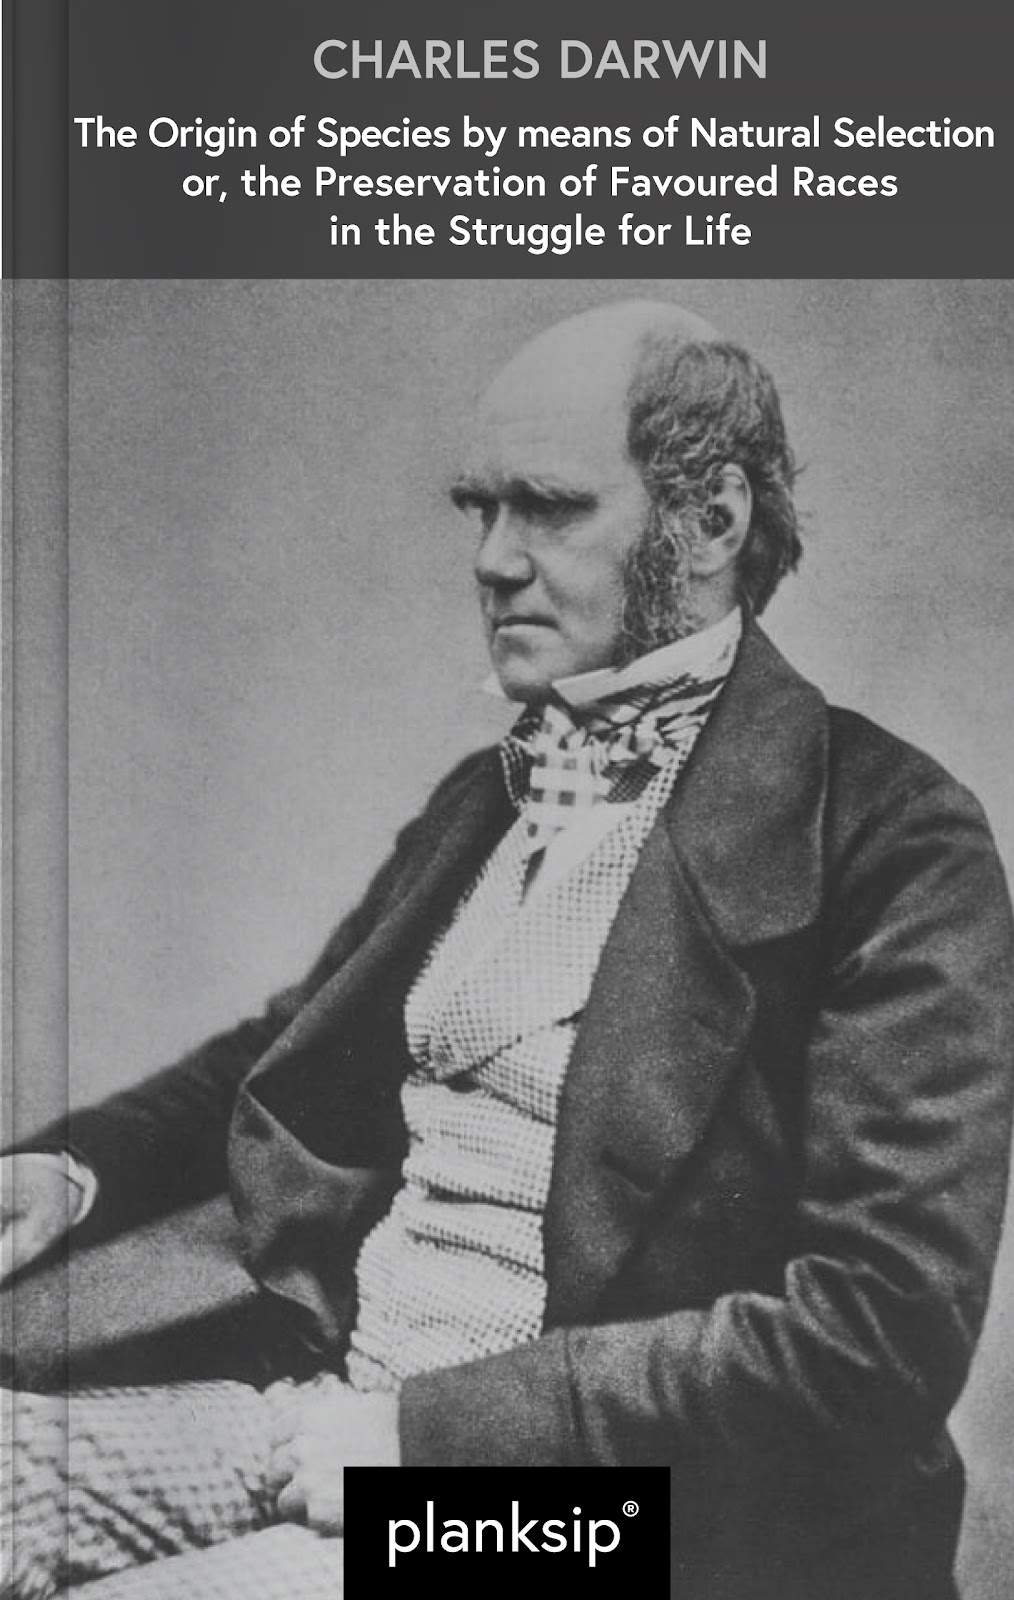 The Origin of Species by means of Natural Selection by Charles Darwin (1809-1882). Published by planksip